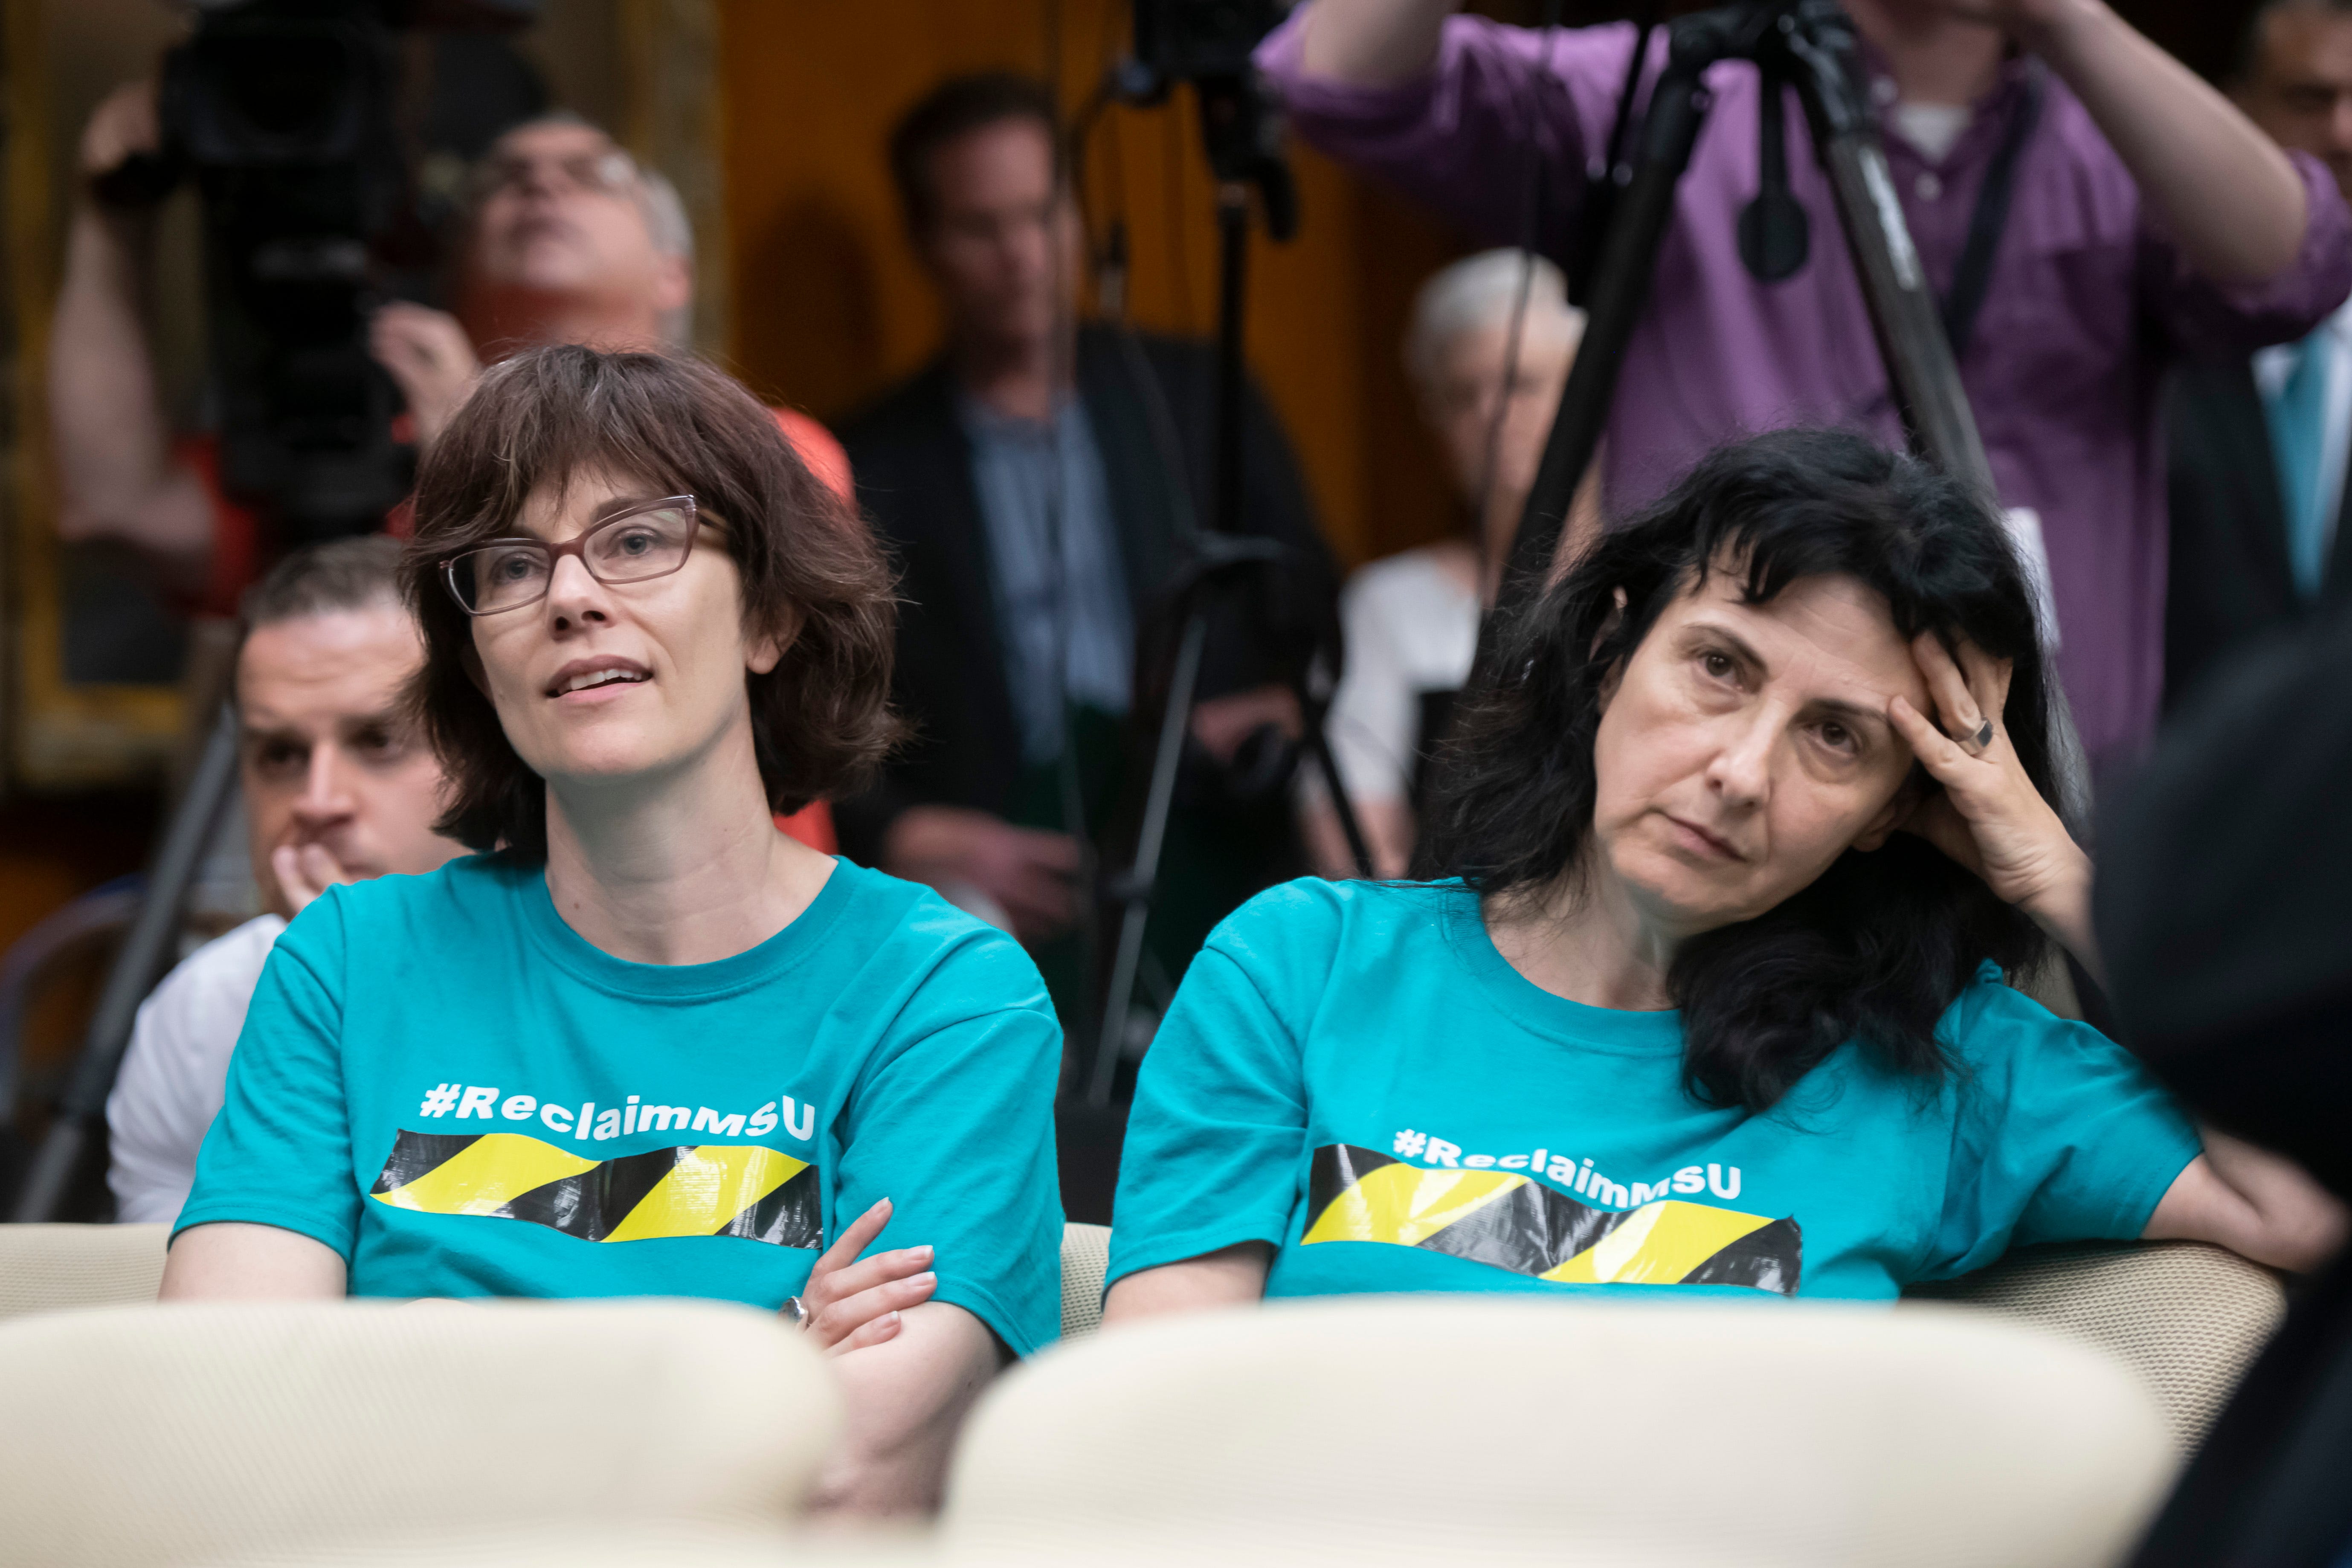 Michigan State professors Anna Pegler-Gordon, left, and Andaluna Borcila listen during a special session of the Michigan State University board of trustees that voted to elect Samuel Stanley Jr. as the 21st president of the university, May 28, 2019.  The pair are members of Reclaim MSU, an organization of staff, students and alumni that demand "a culture of transparency and accountability" at the university.